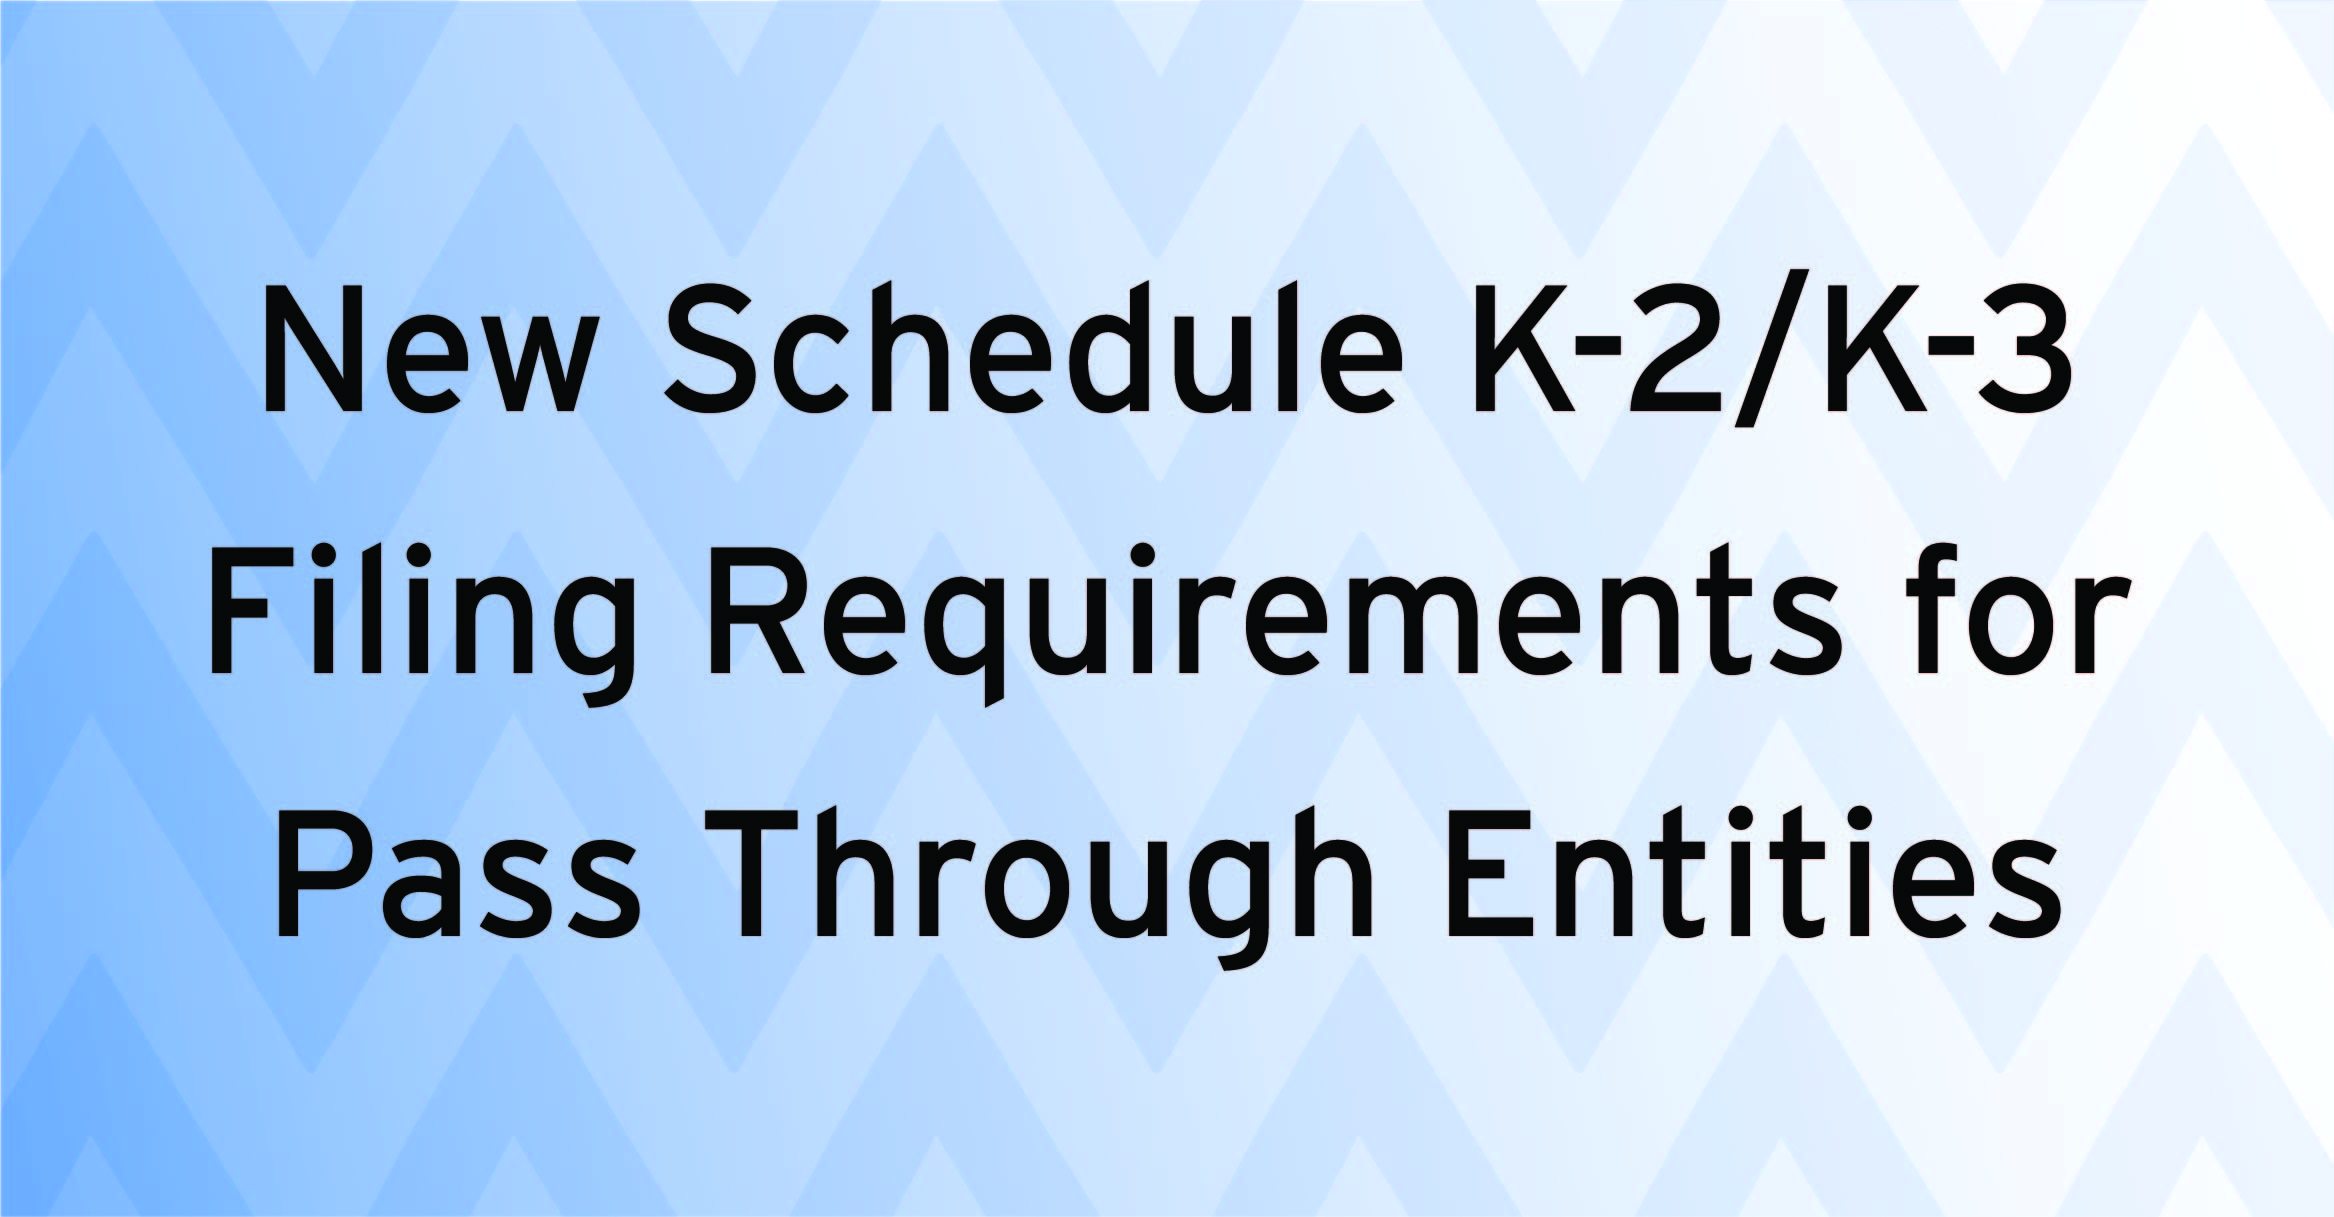 New Schedule K-2 / K-3 Filing Requirements for Pass-Through Entities